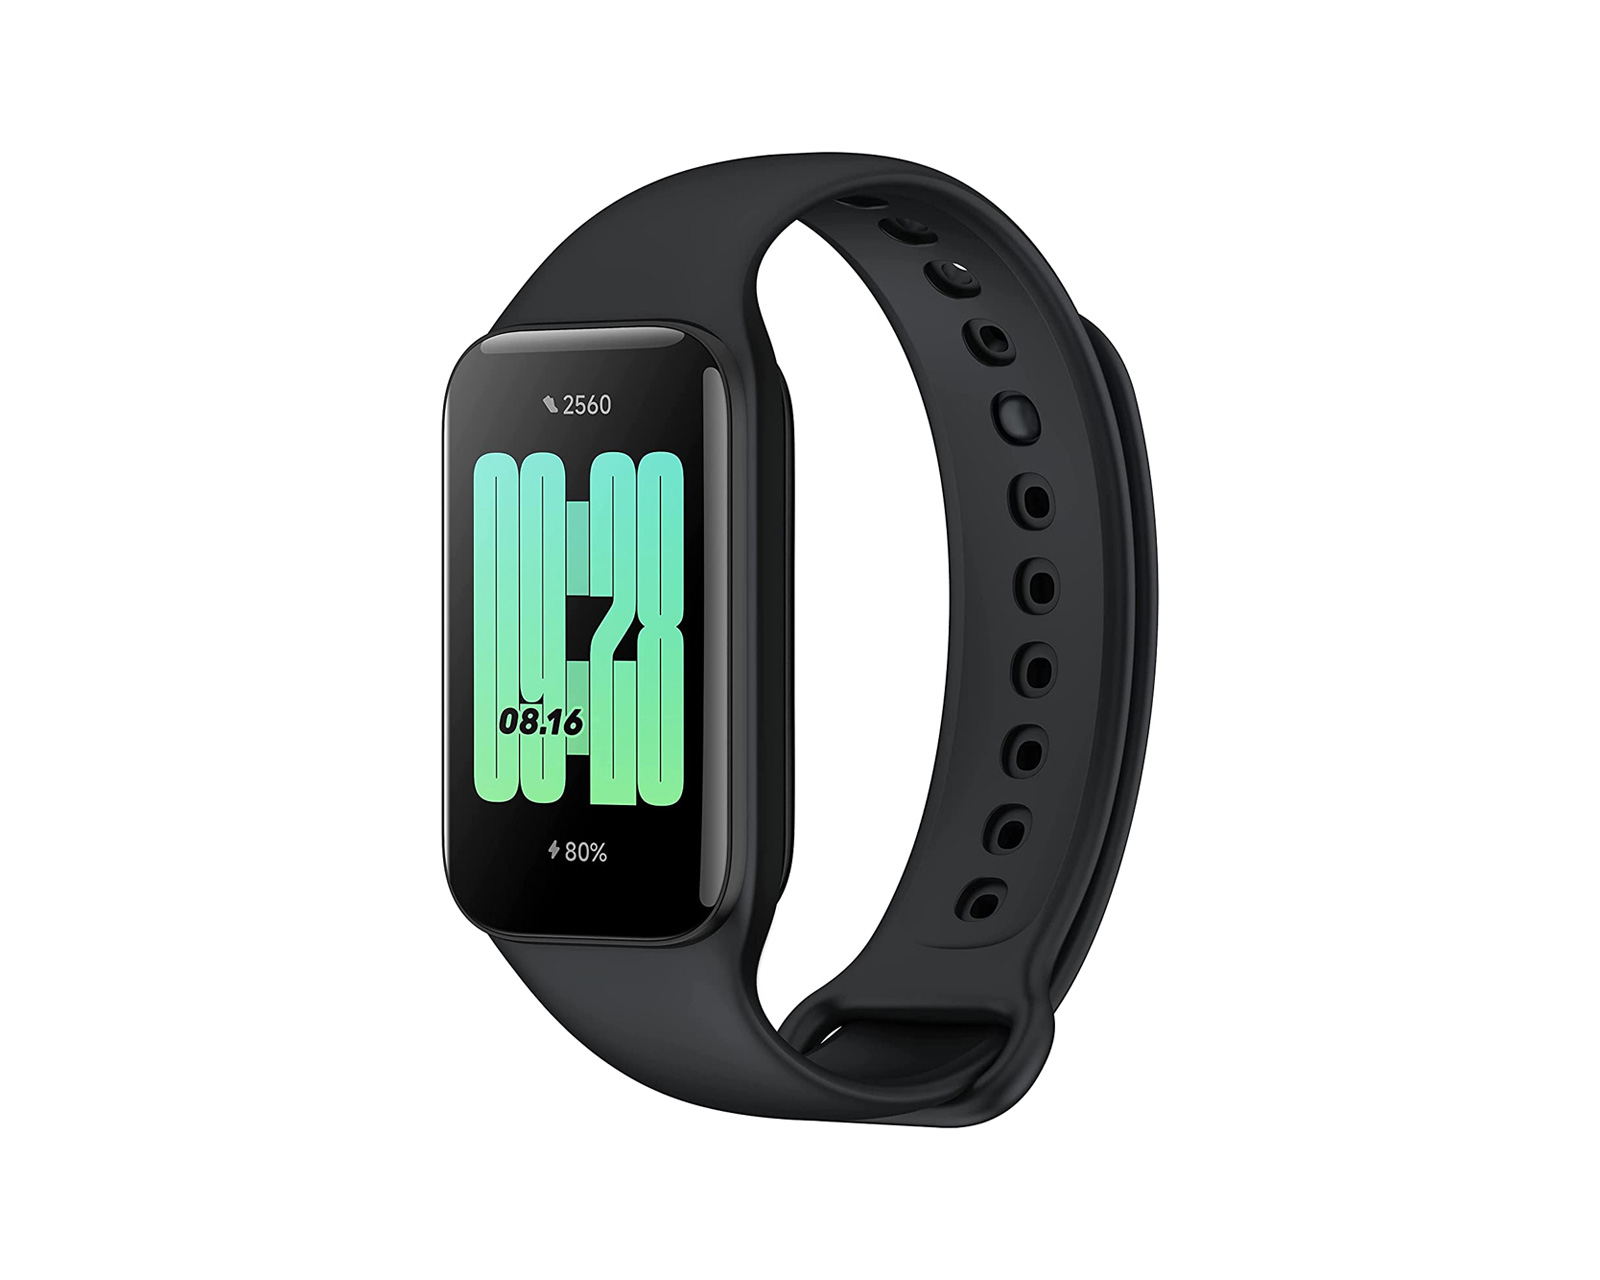  Xiaomi Redmi Band 2 Activity Fitness Tracker with 1.47